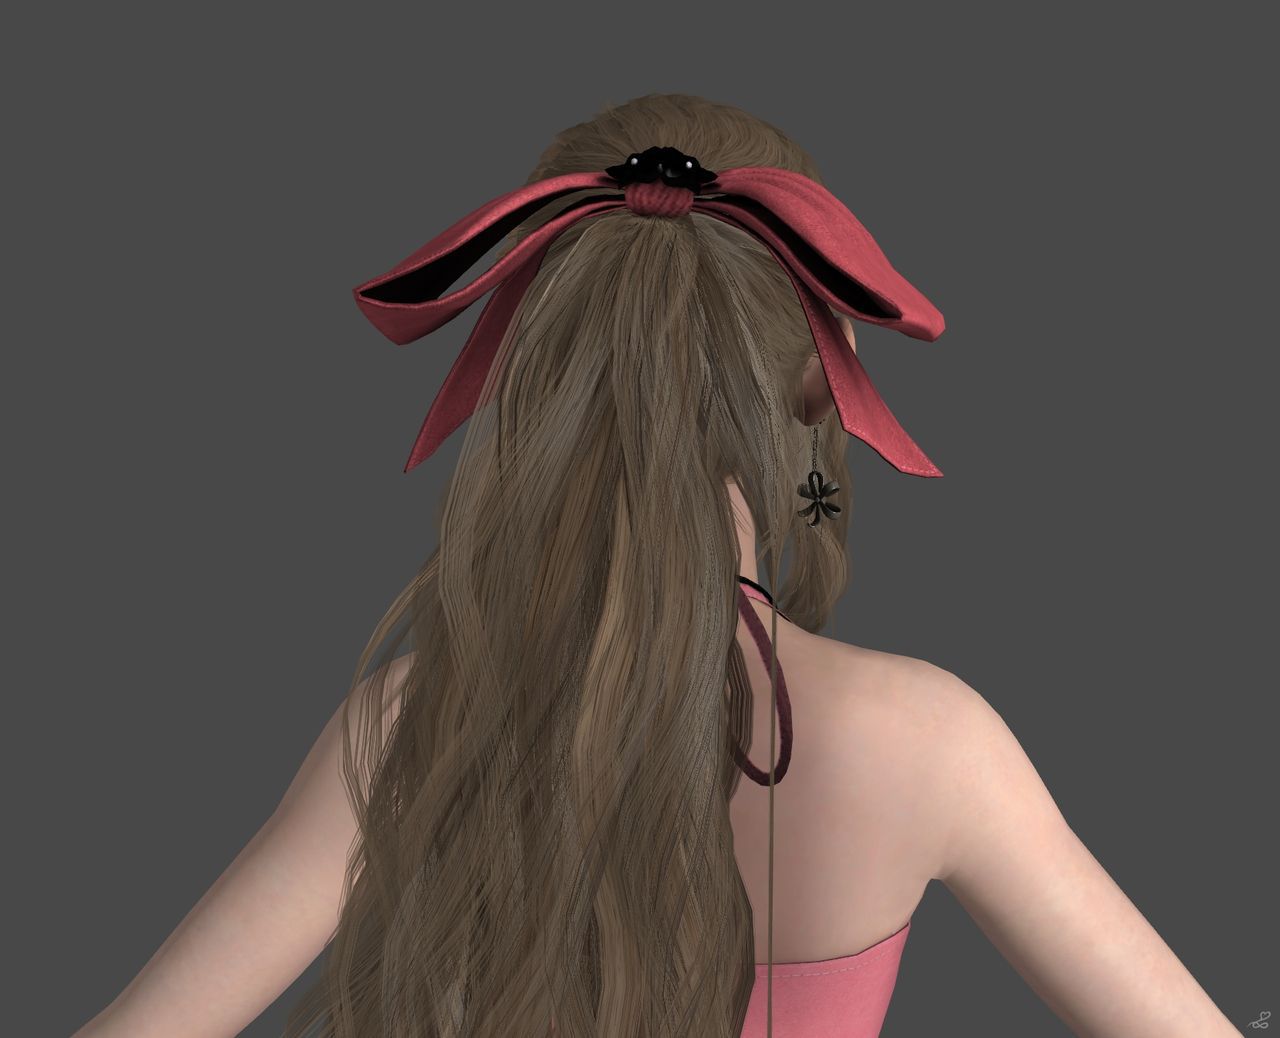 [J.A.] FF7 Remake | Aerith Reference 27